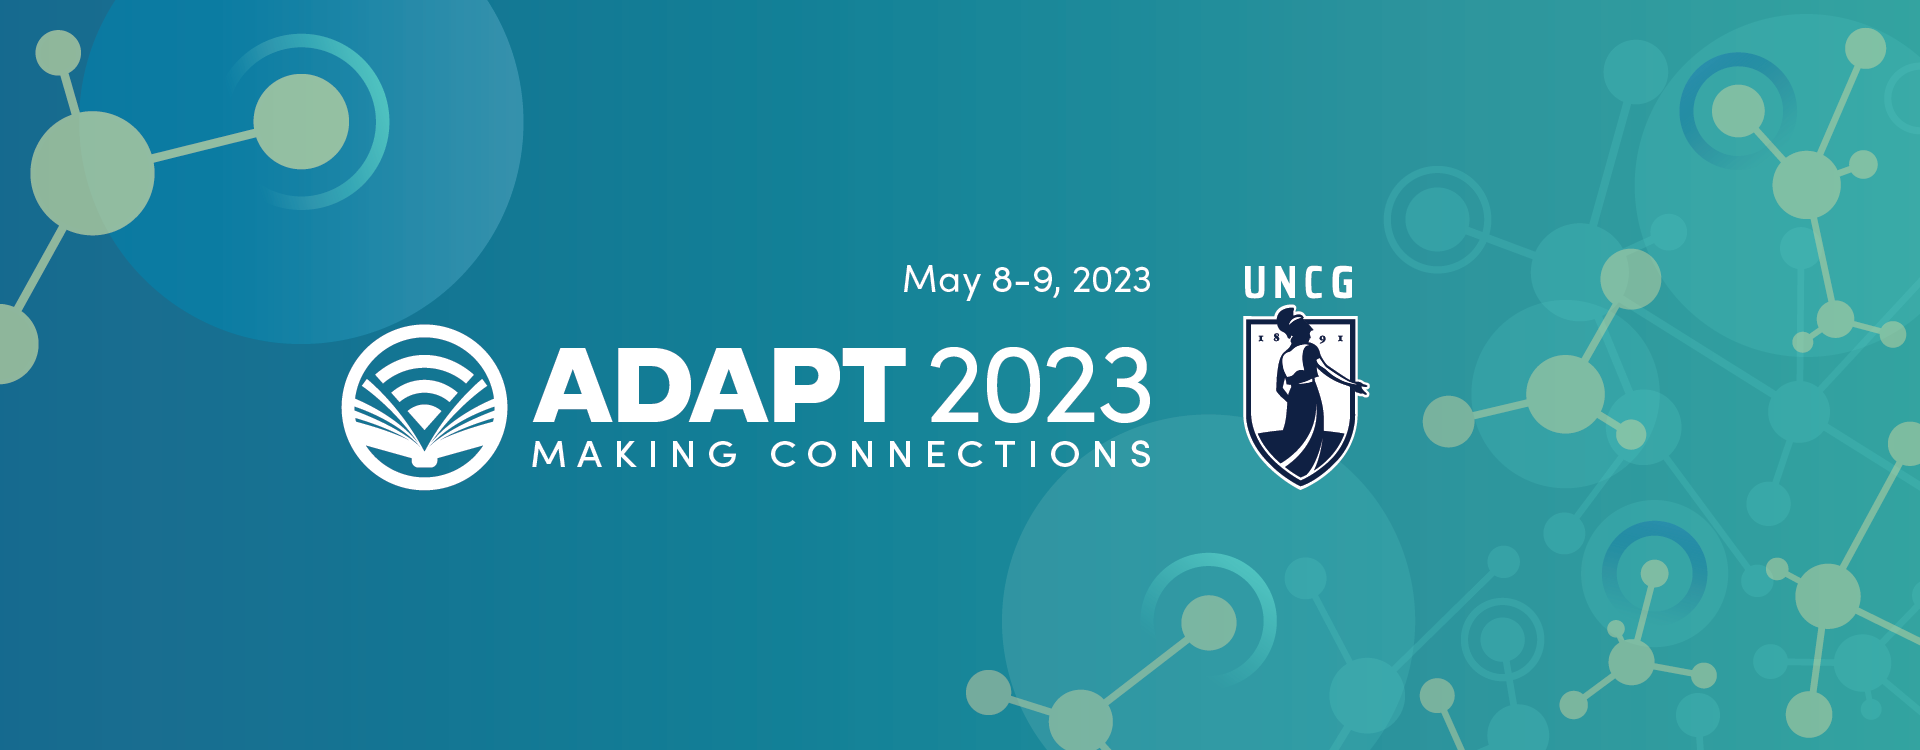 Adapt 2023: Making Connections banner